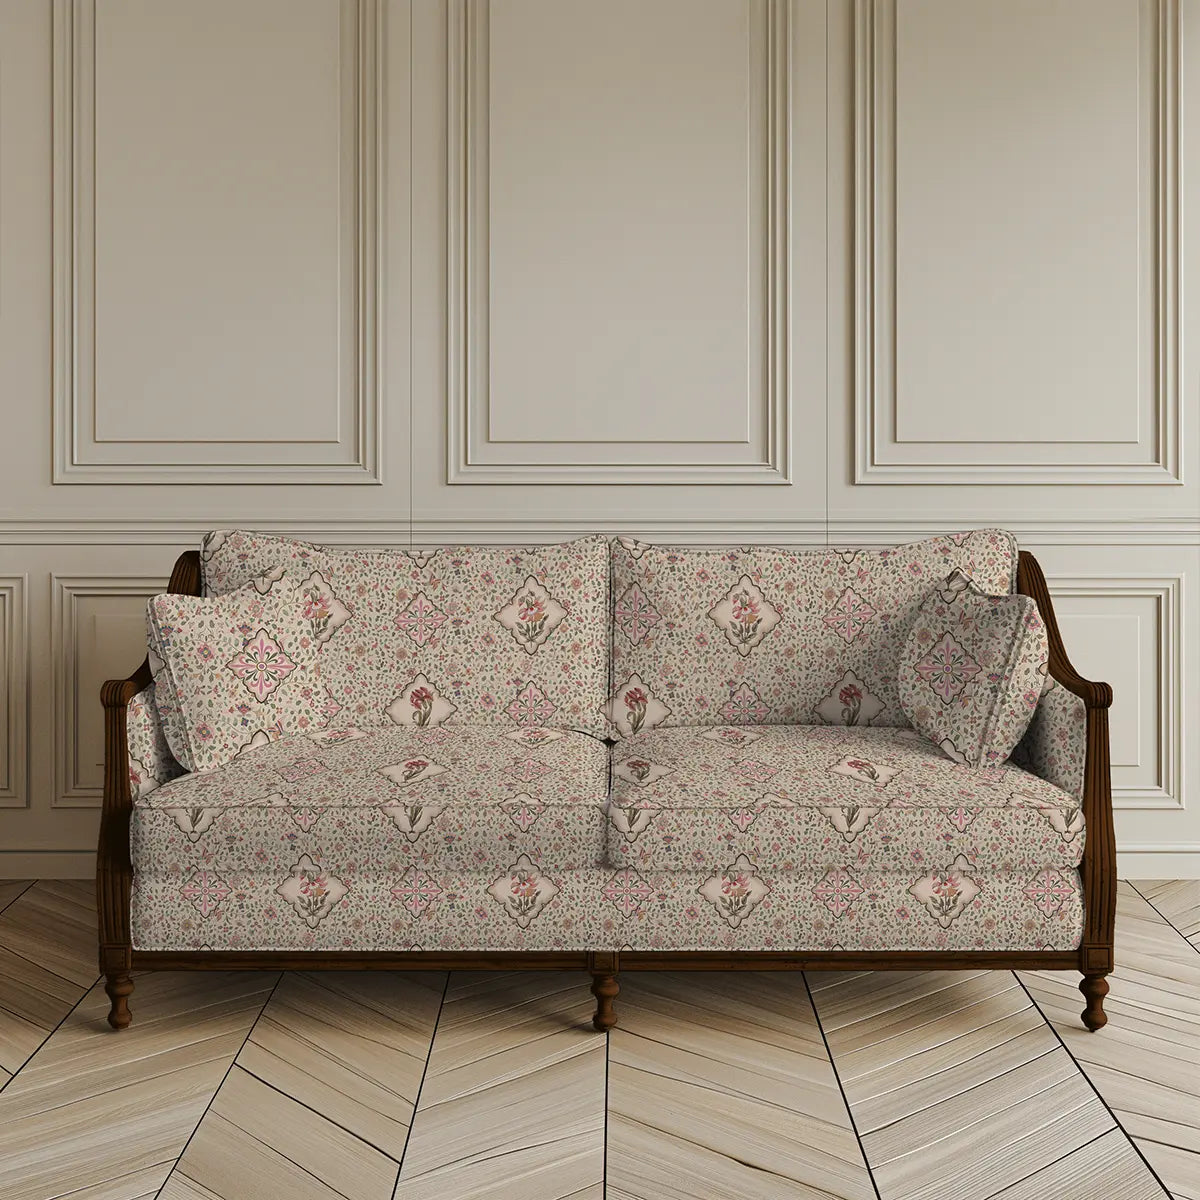 Virasat Floral Pattern for Sofa and Chair Upholstery Fabric in Beige Buti pattern